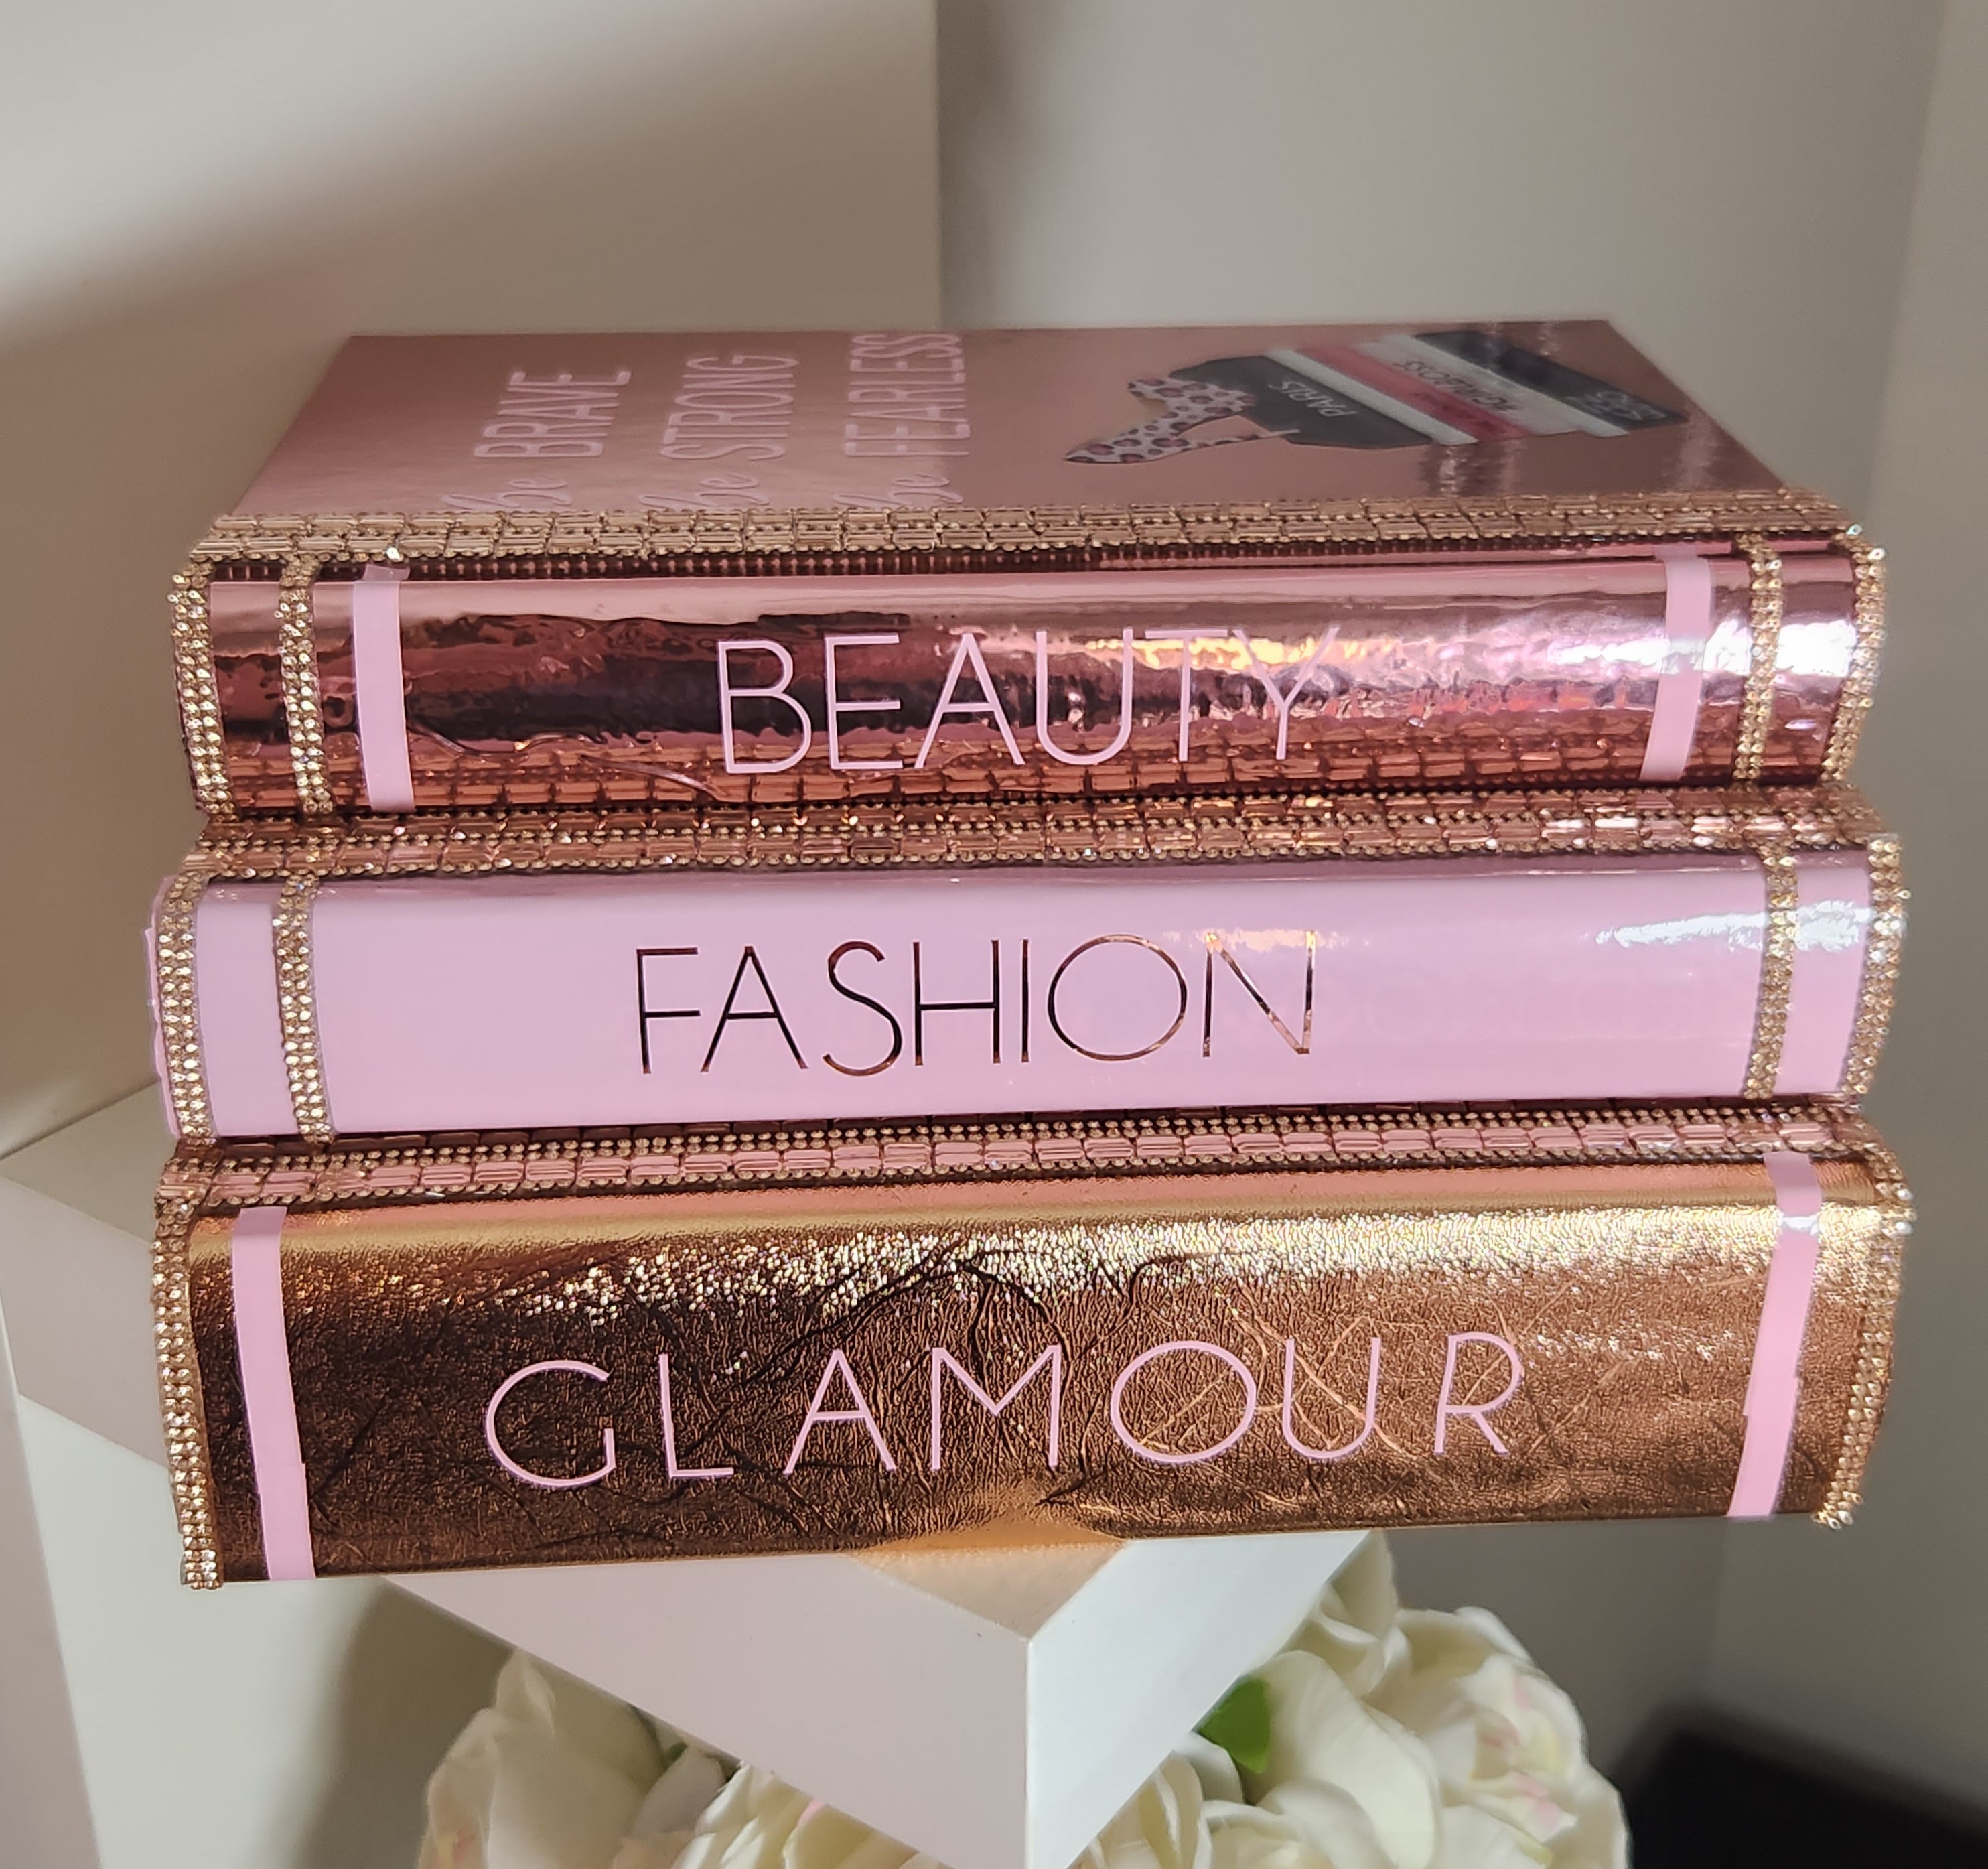  Fashion Inspired Decorative Books - Hardcover Fake Decorative  Books for Coffee Table/Shelves with No Pages - Lightweight Aesthetic Book  Display Stack for Minimalist Office/Home Décor - Set of 3: 0718157502116:  Generic